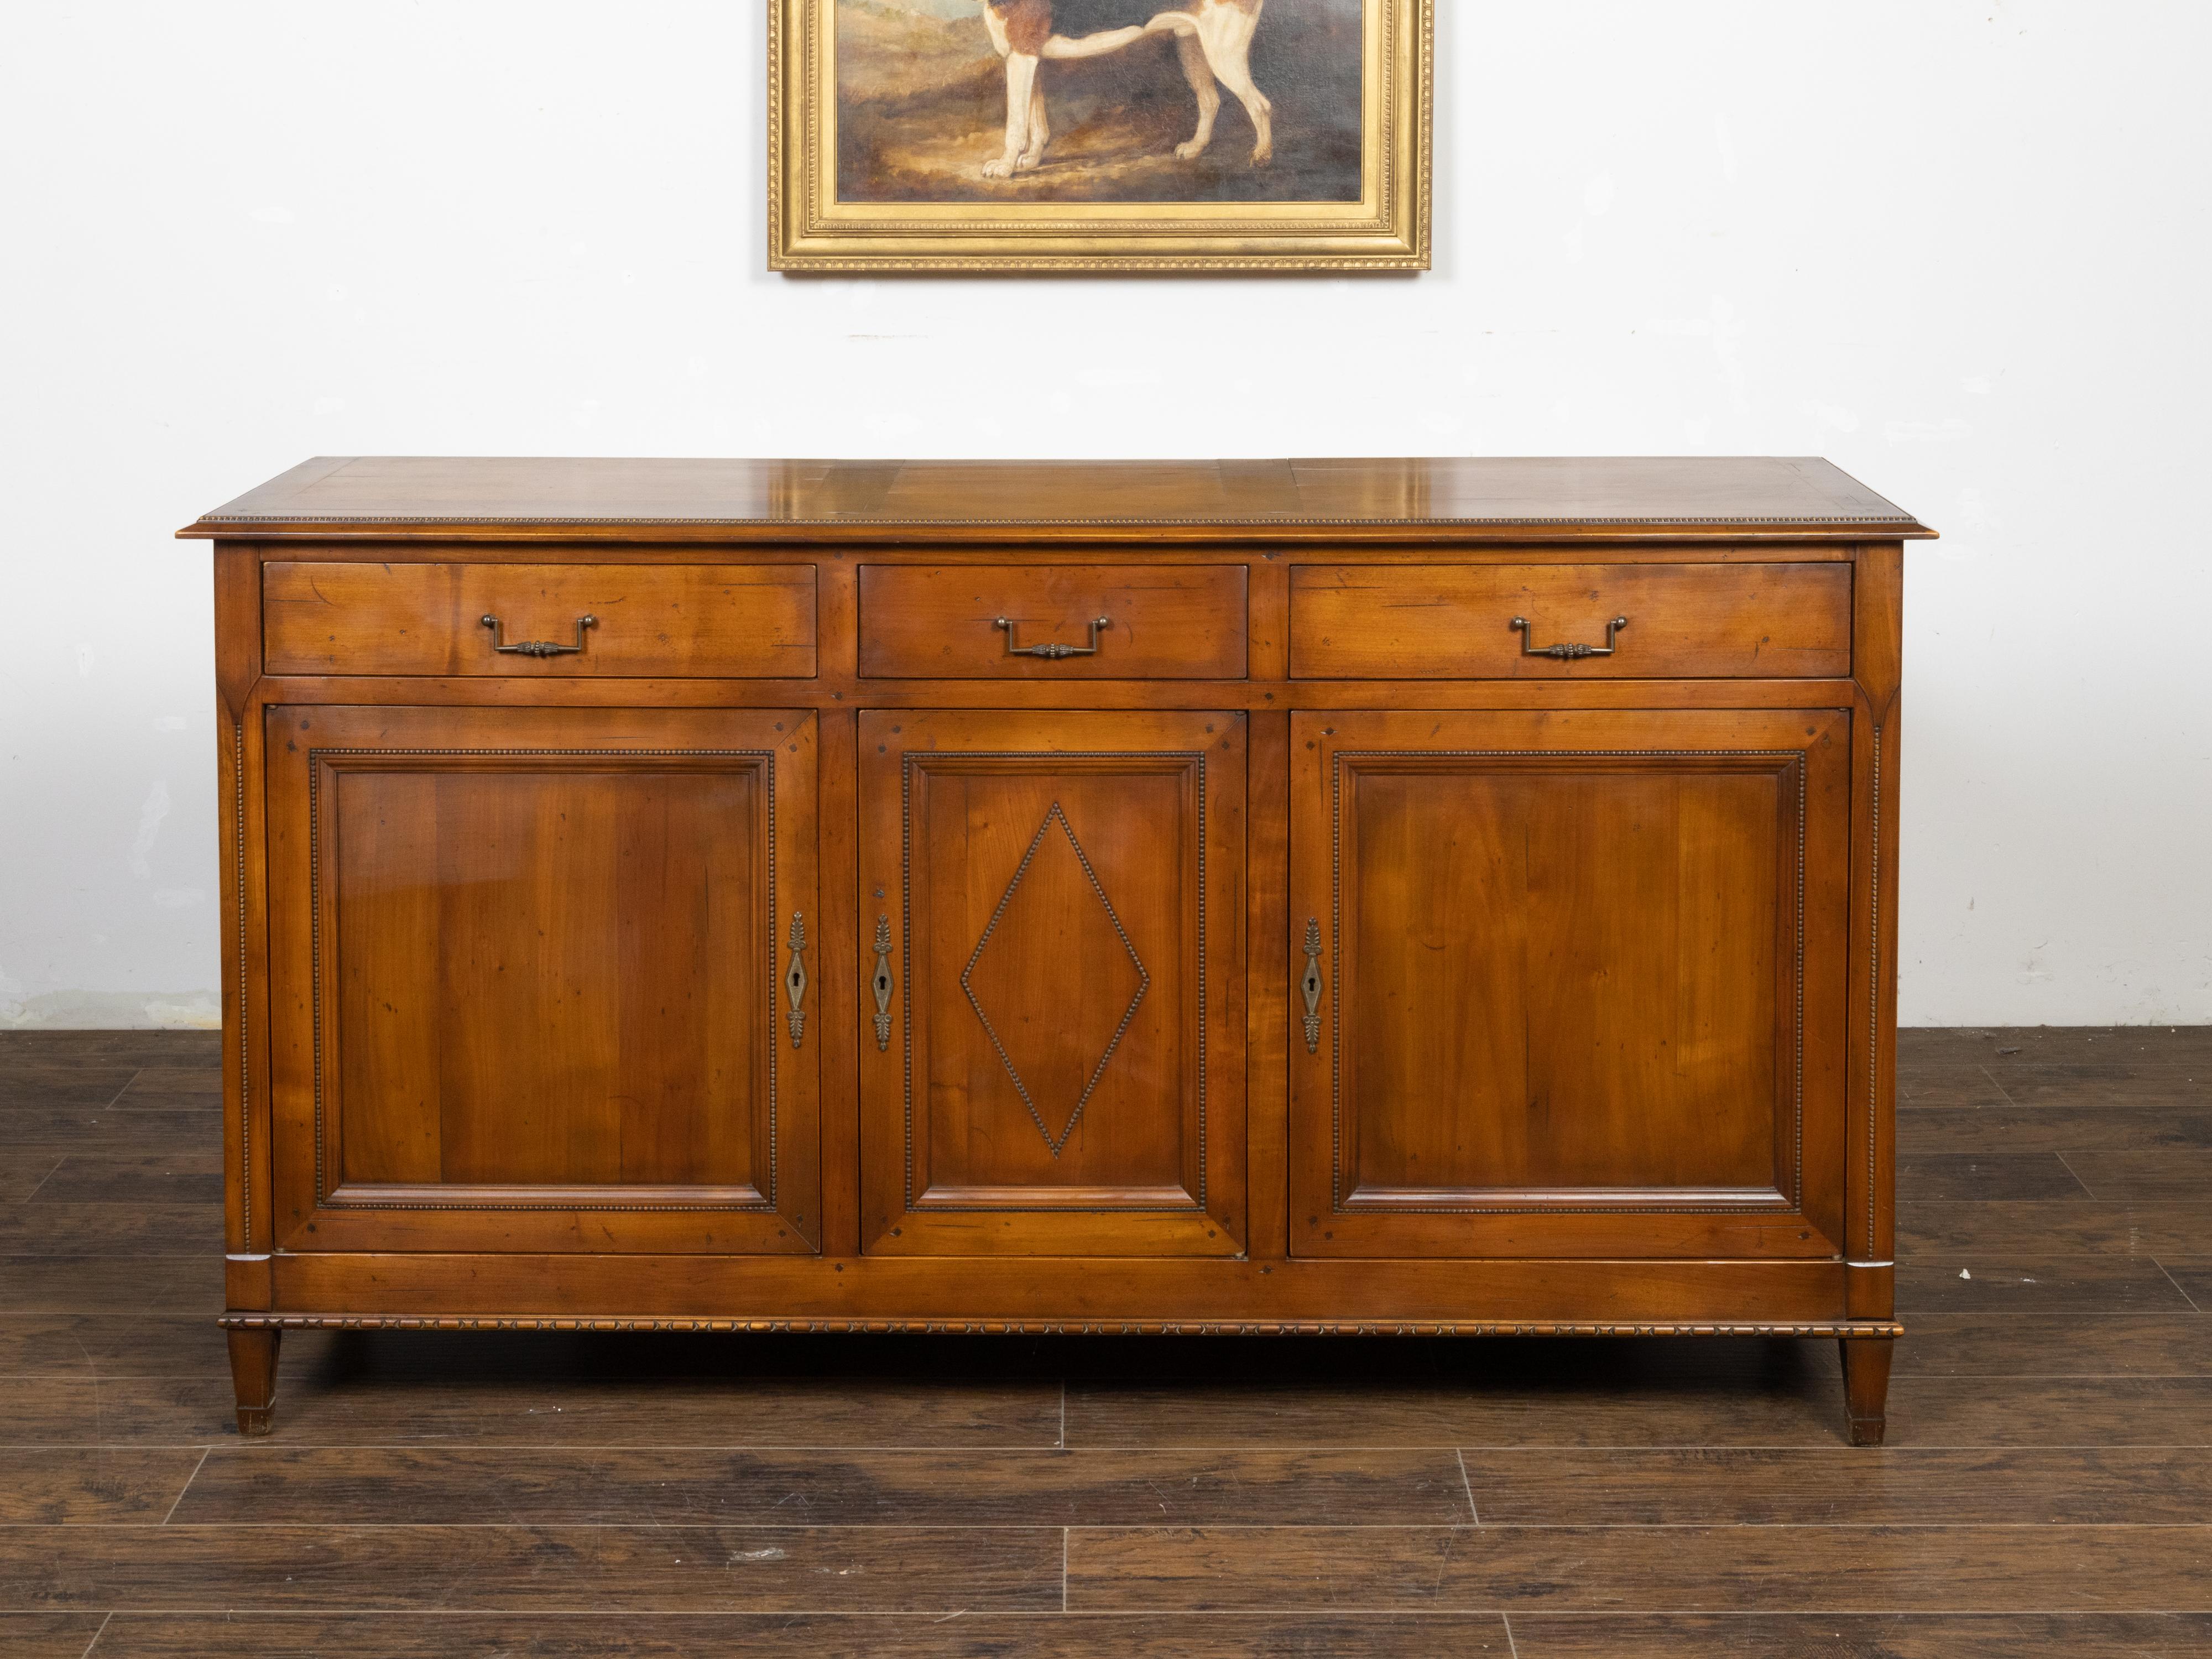 A French walnut enfilade from the mid-20th century with three drawers over three doors, carved beads and diamond motif. Created in France during the second quarter of the 20th century, this walnut enfilade features a rectangular top with three